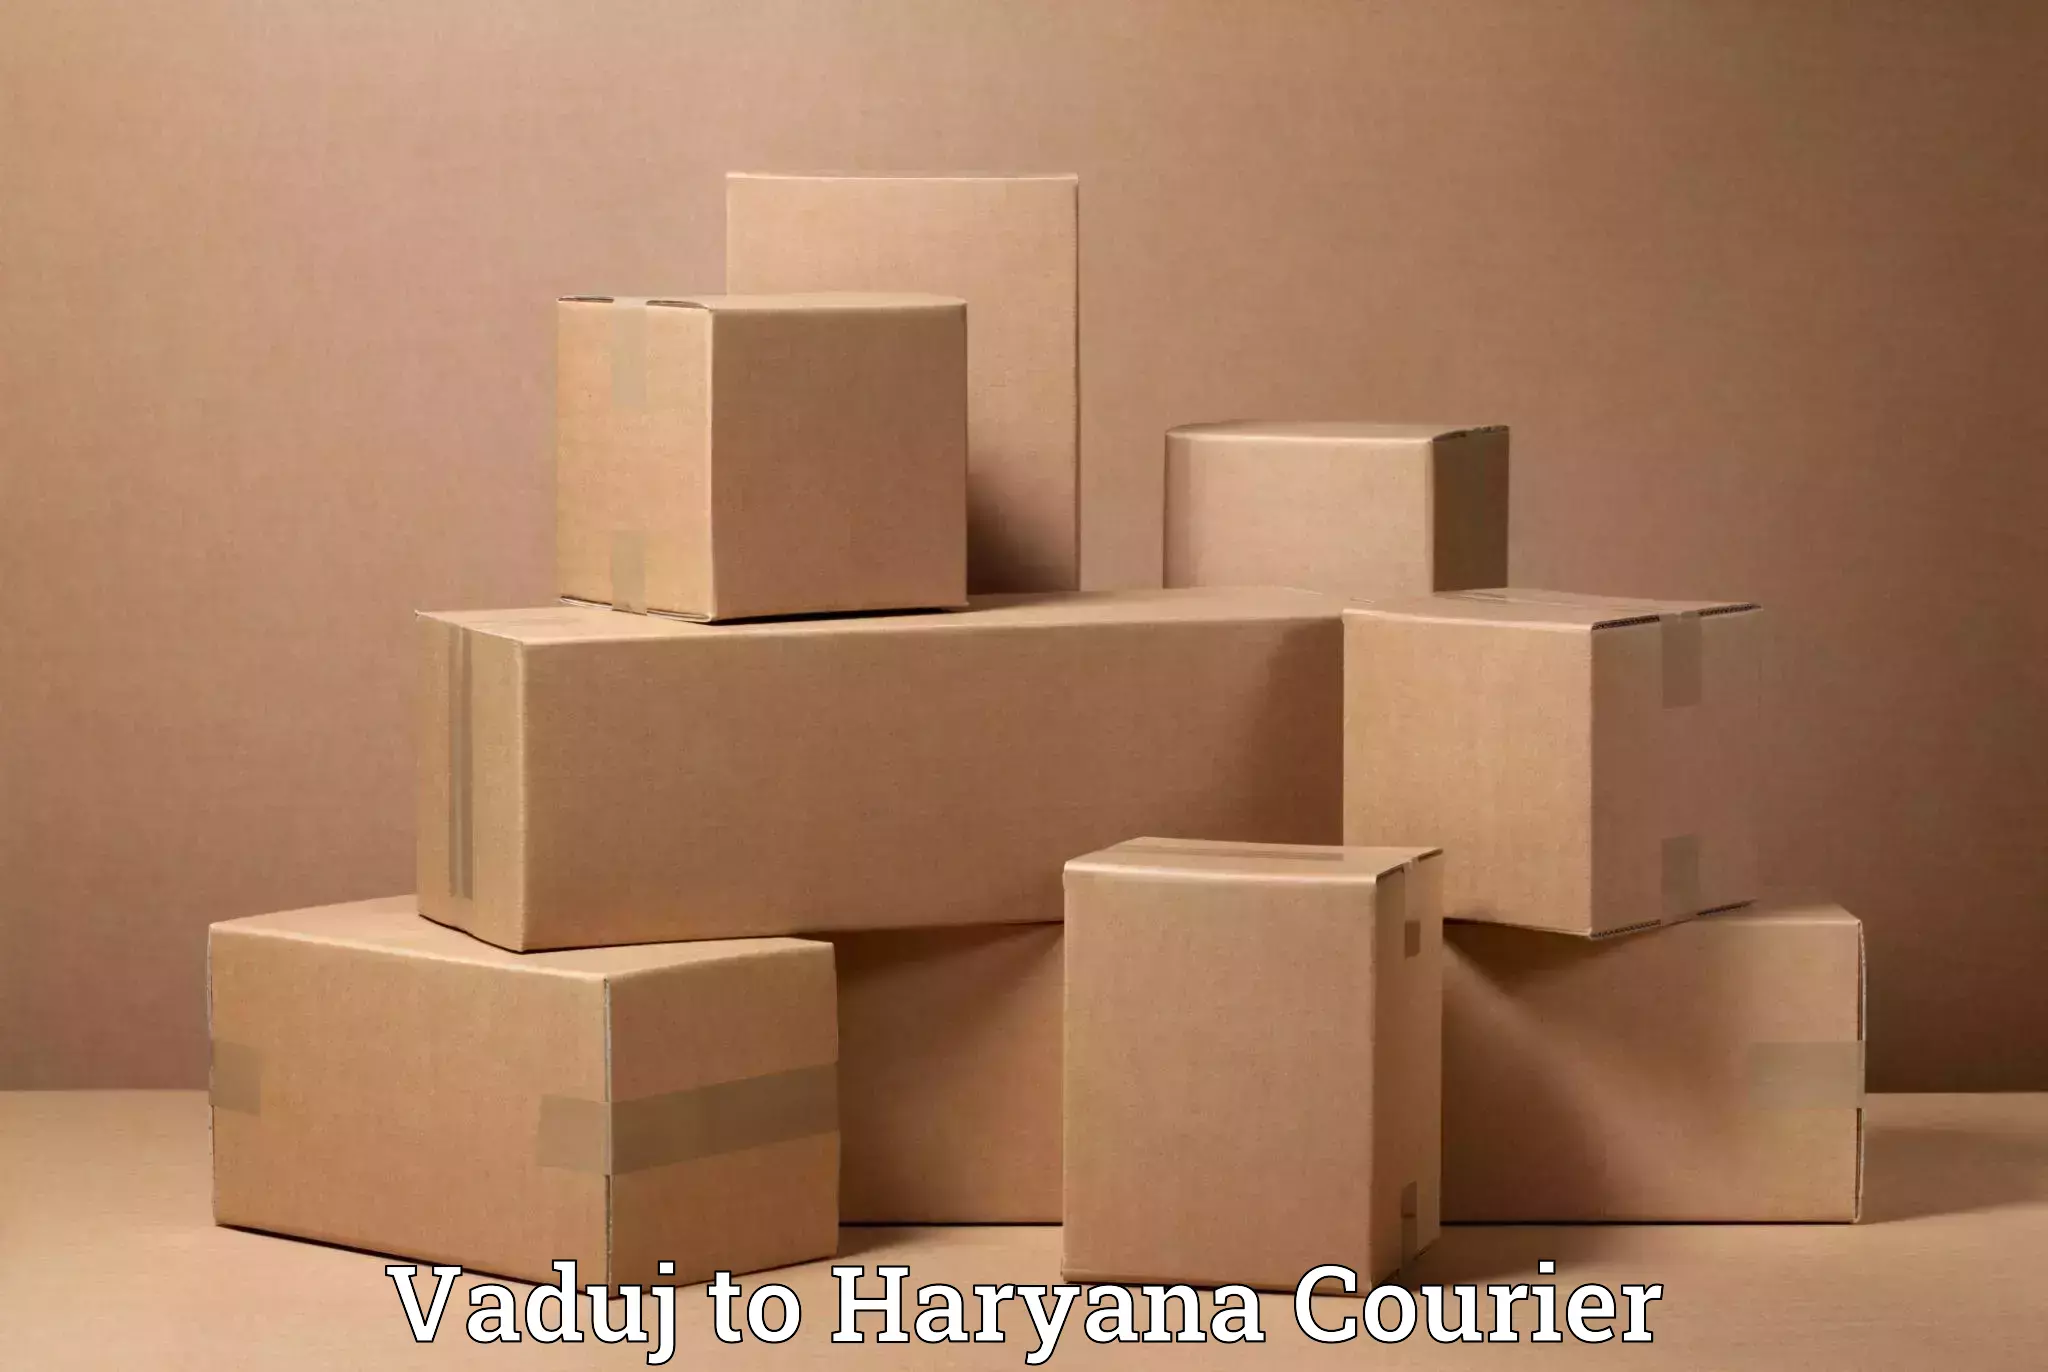 Trusted relocation services Vaduj to Gurgaon